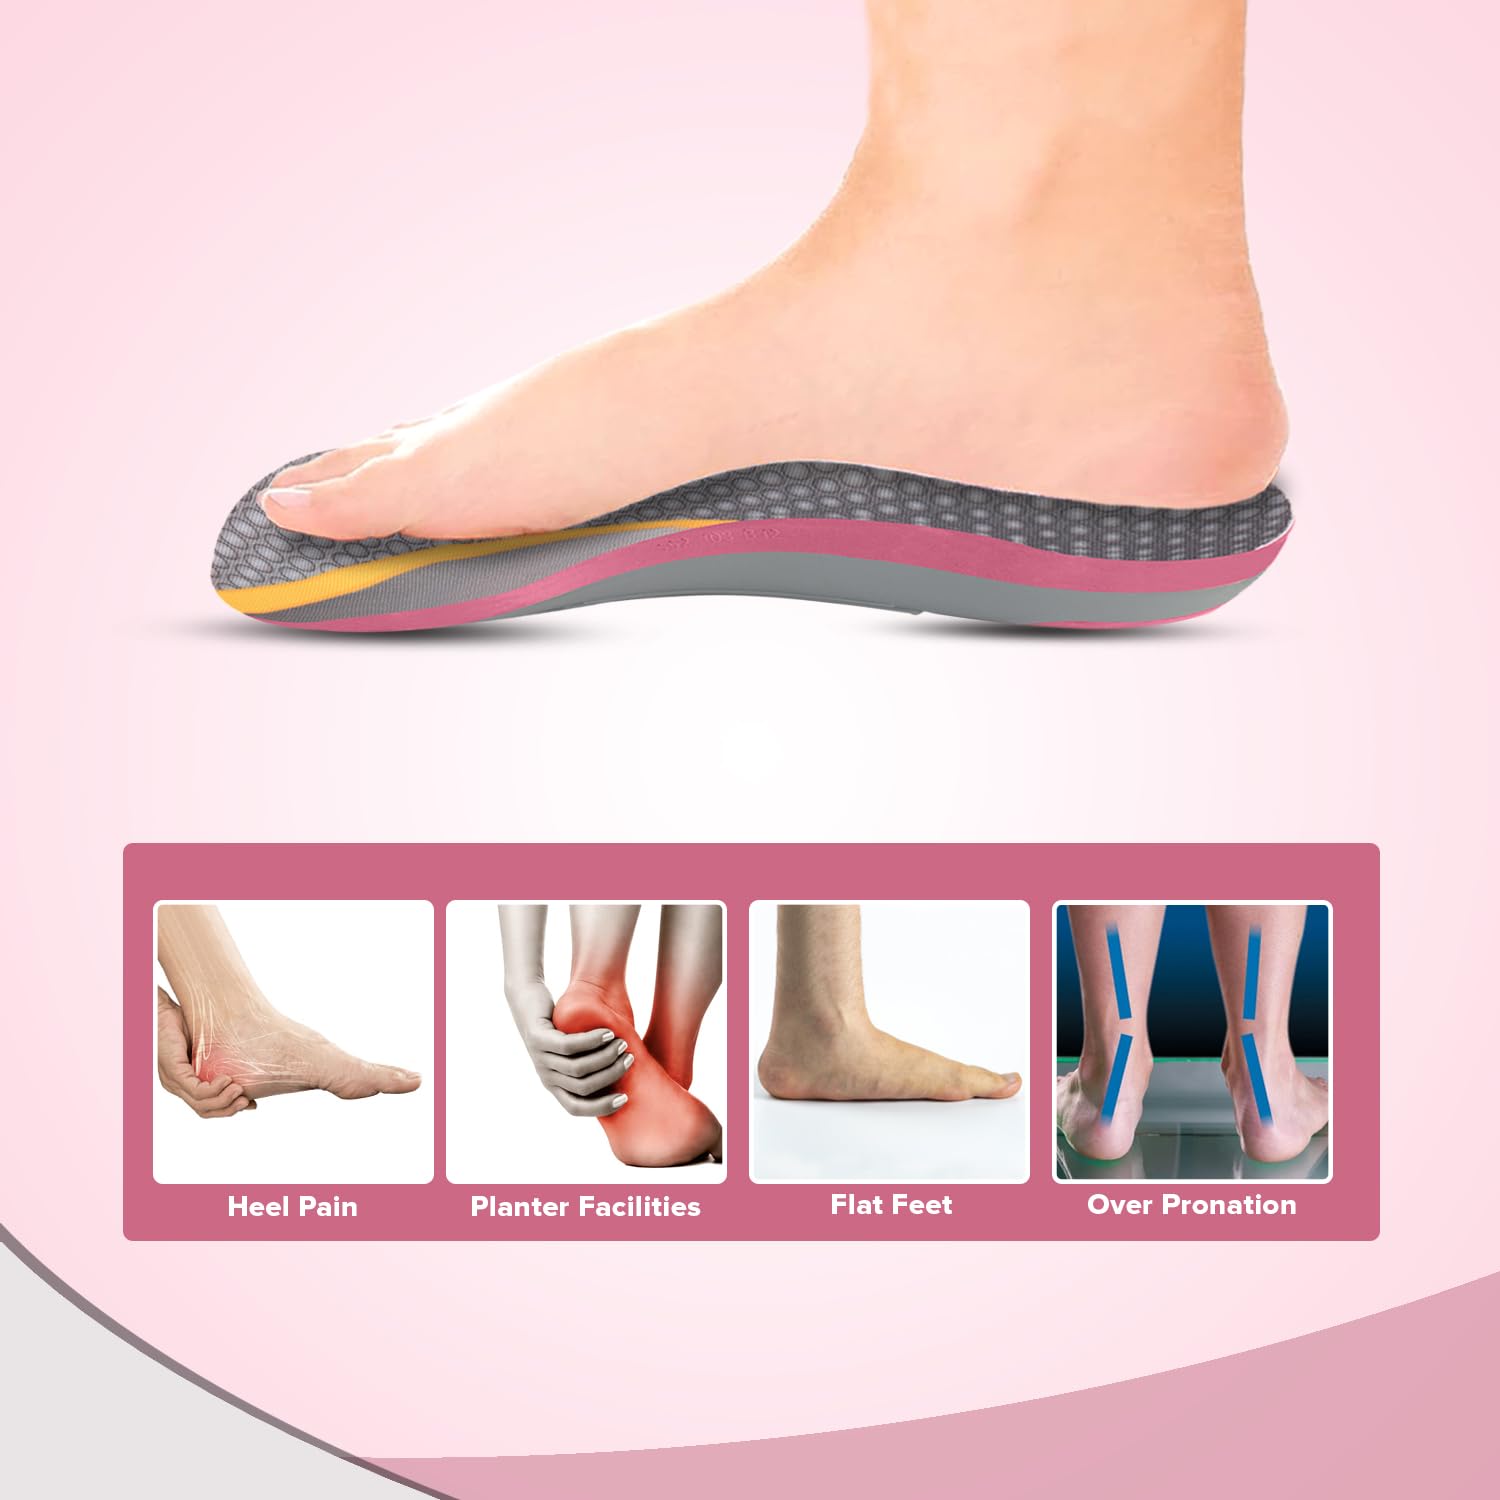 Dr Foot Custom Fit Orthotics |For Arch & Heel Orthotics | Shock Absorbing | TPE Material with Light & Soft Fabric | All Day Comfort | For Men & Women - 1 Pair (Small Size)